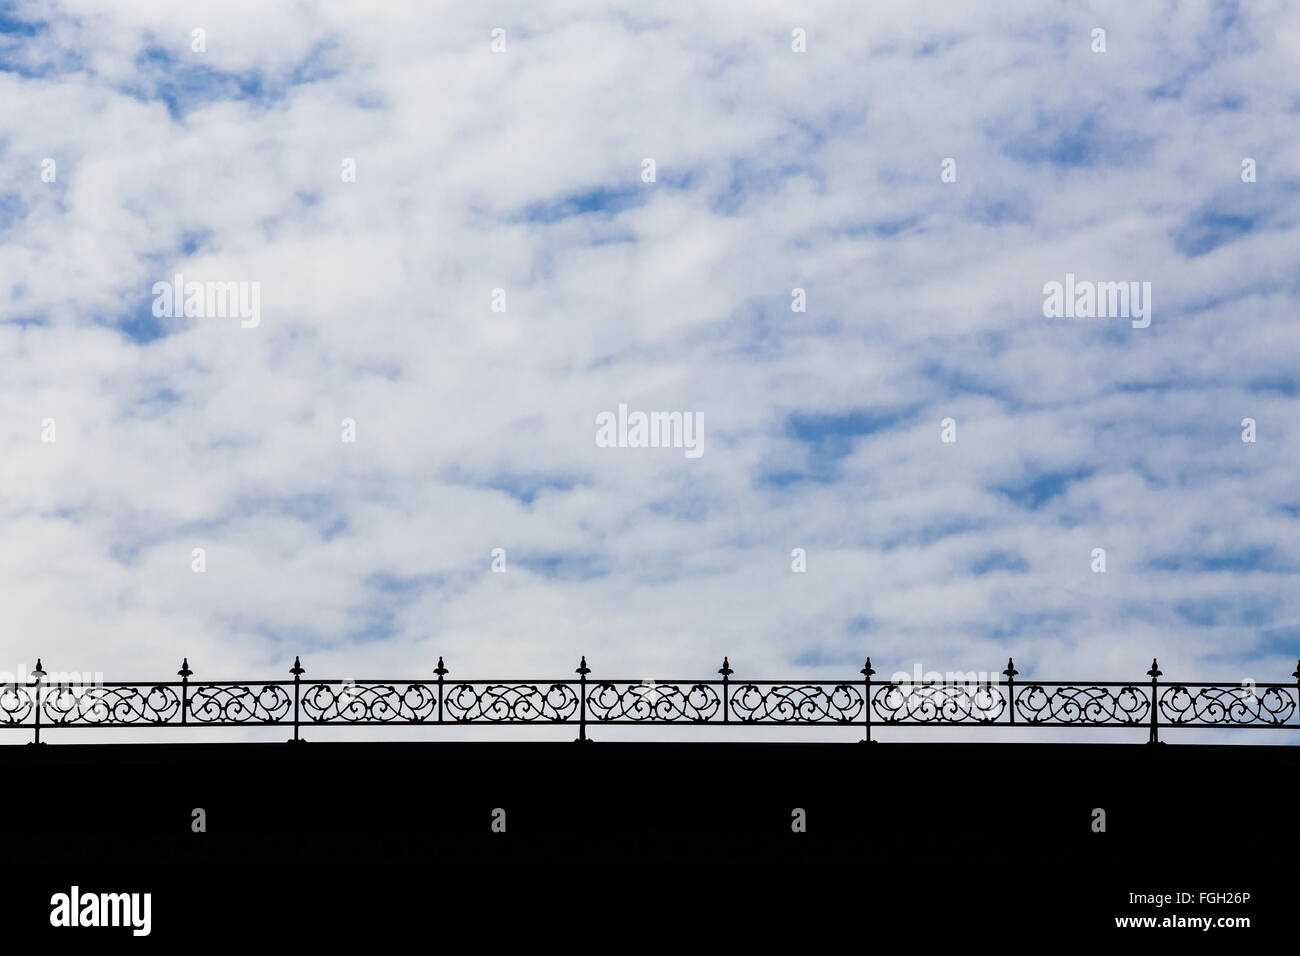 Bridge railing made of iron creates an interesting abstract of materials and sky in California Stock Photo